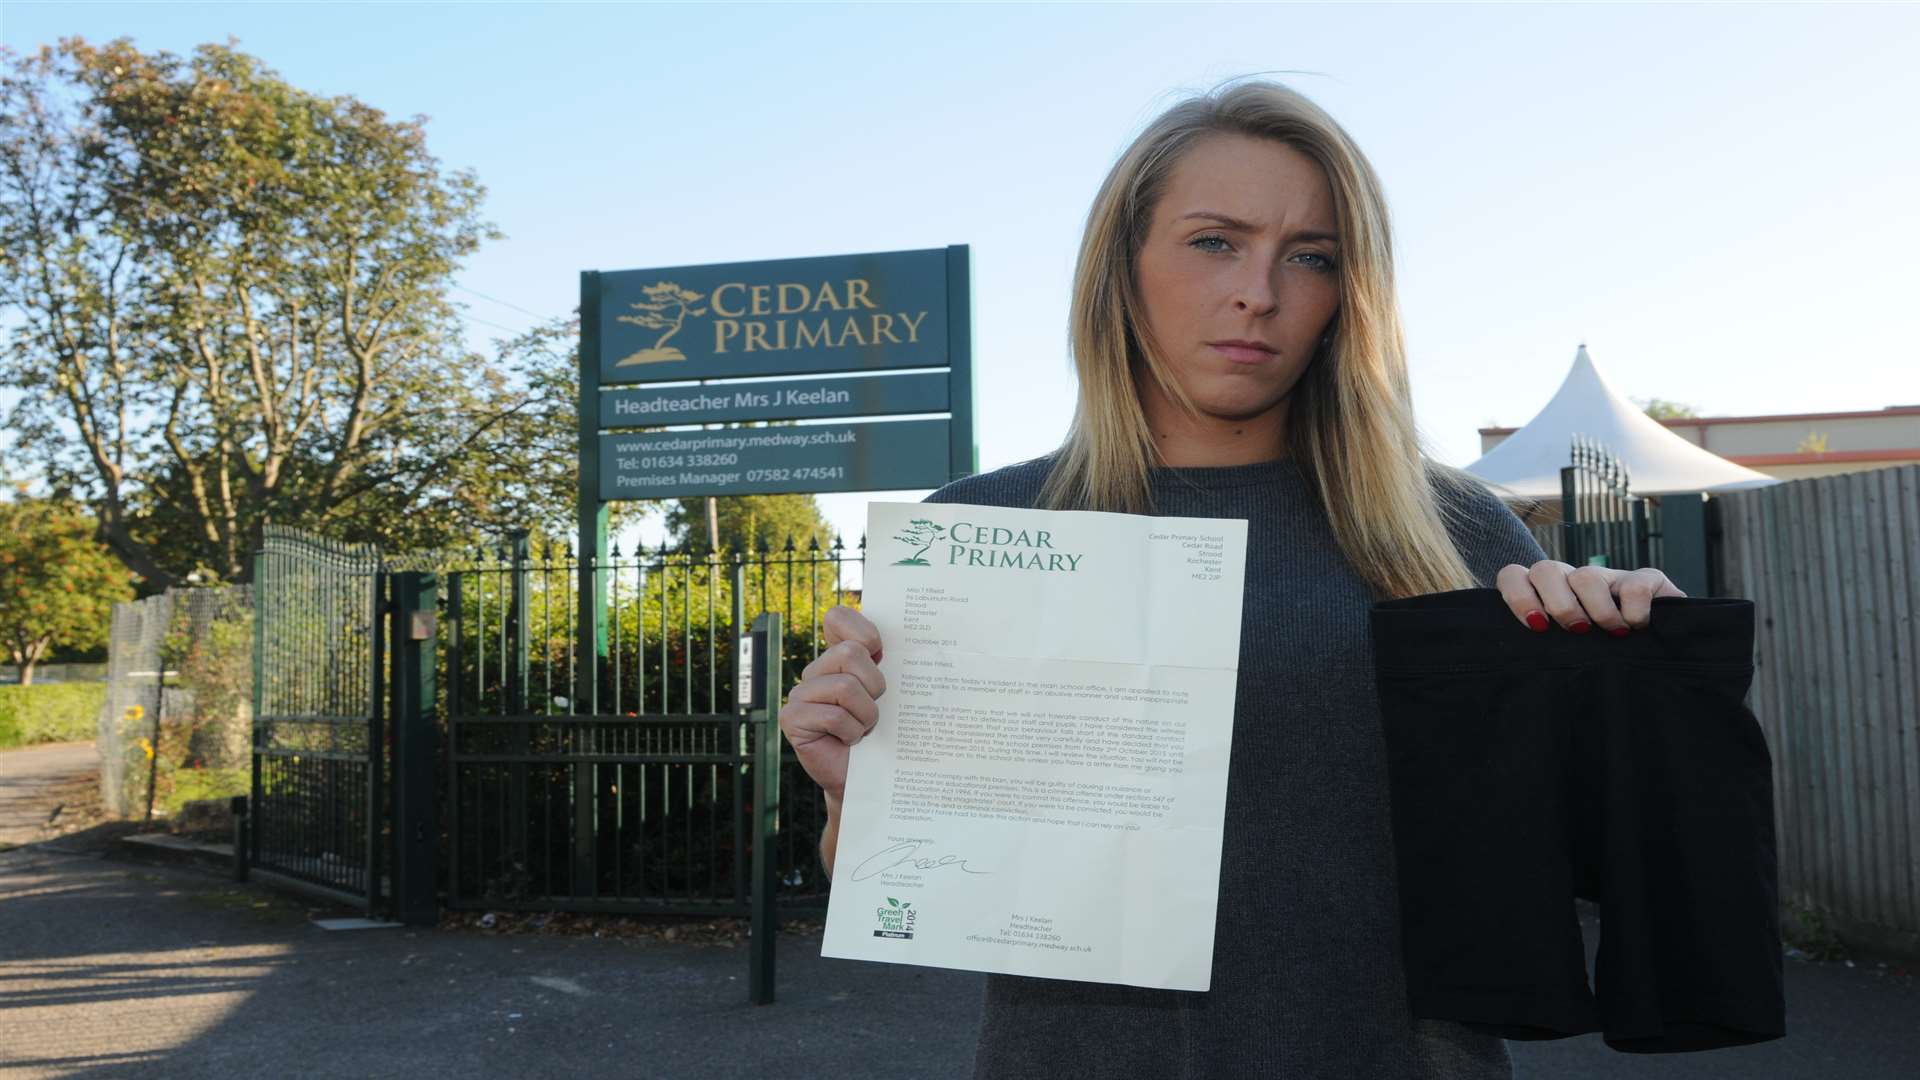 Tara Fifield holds a pair of the controversial shorts and the letter barring her from Cedar Primary